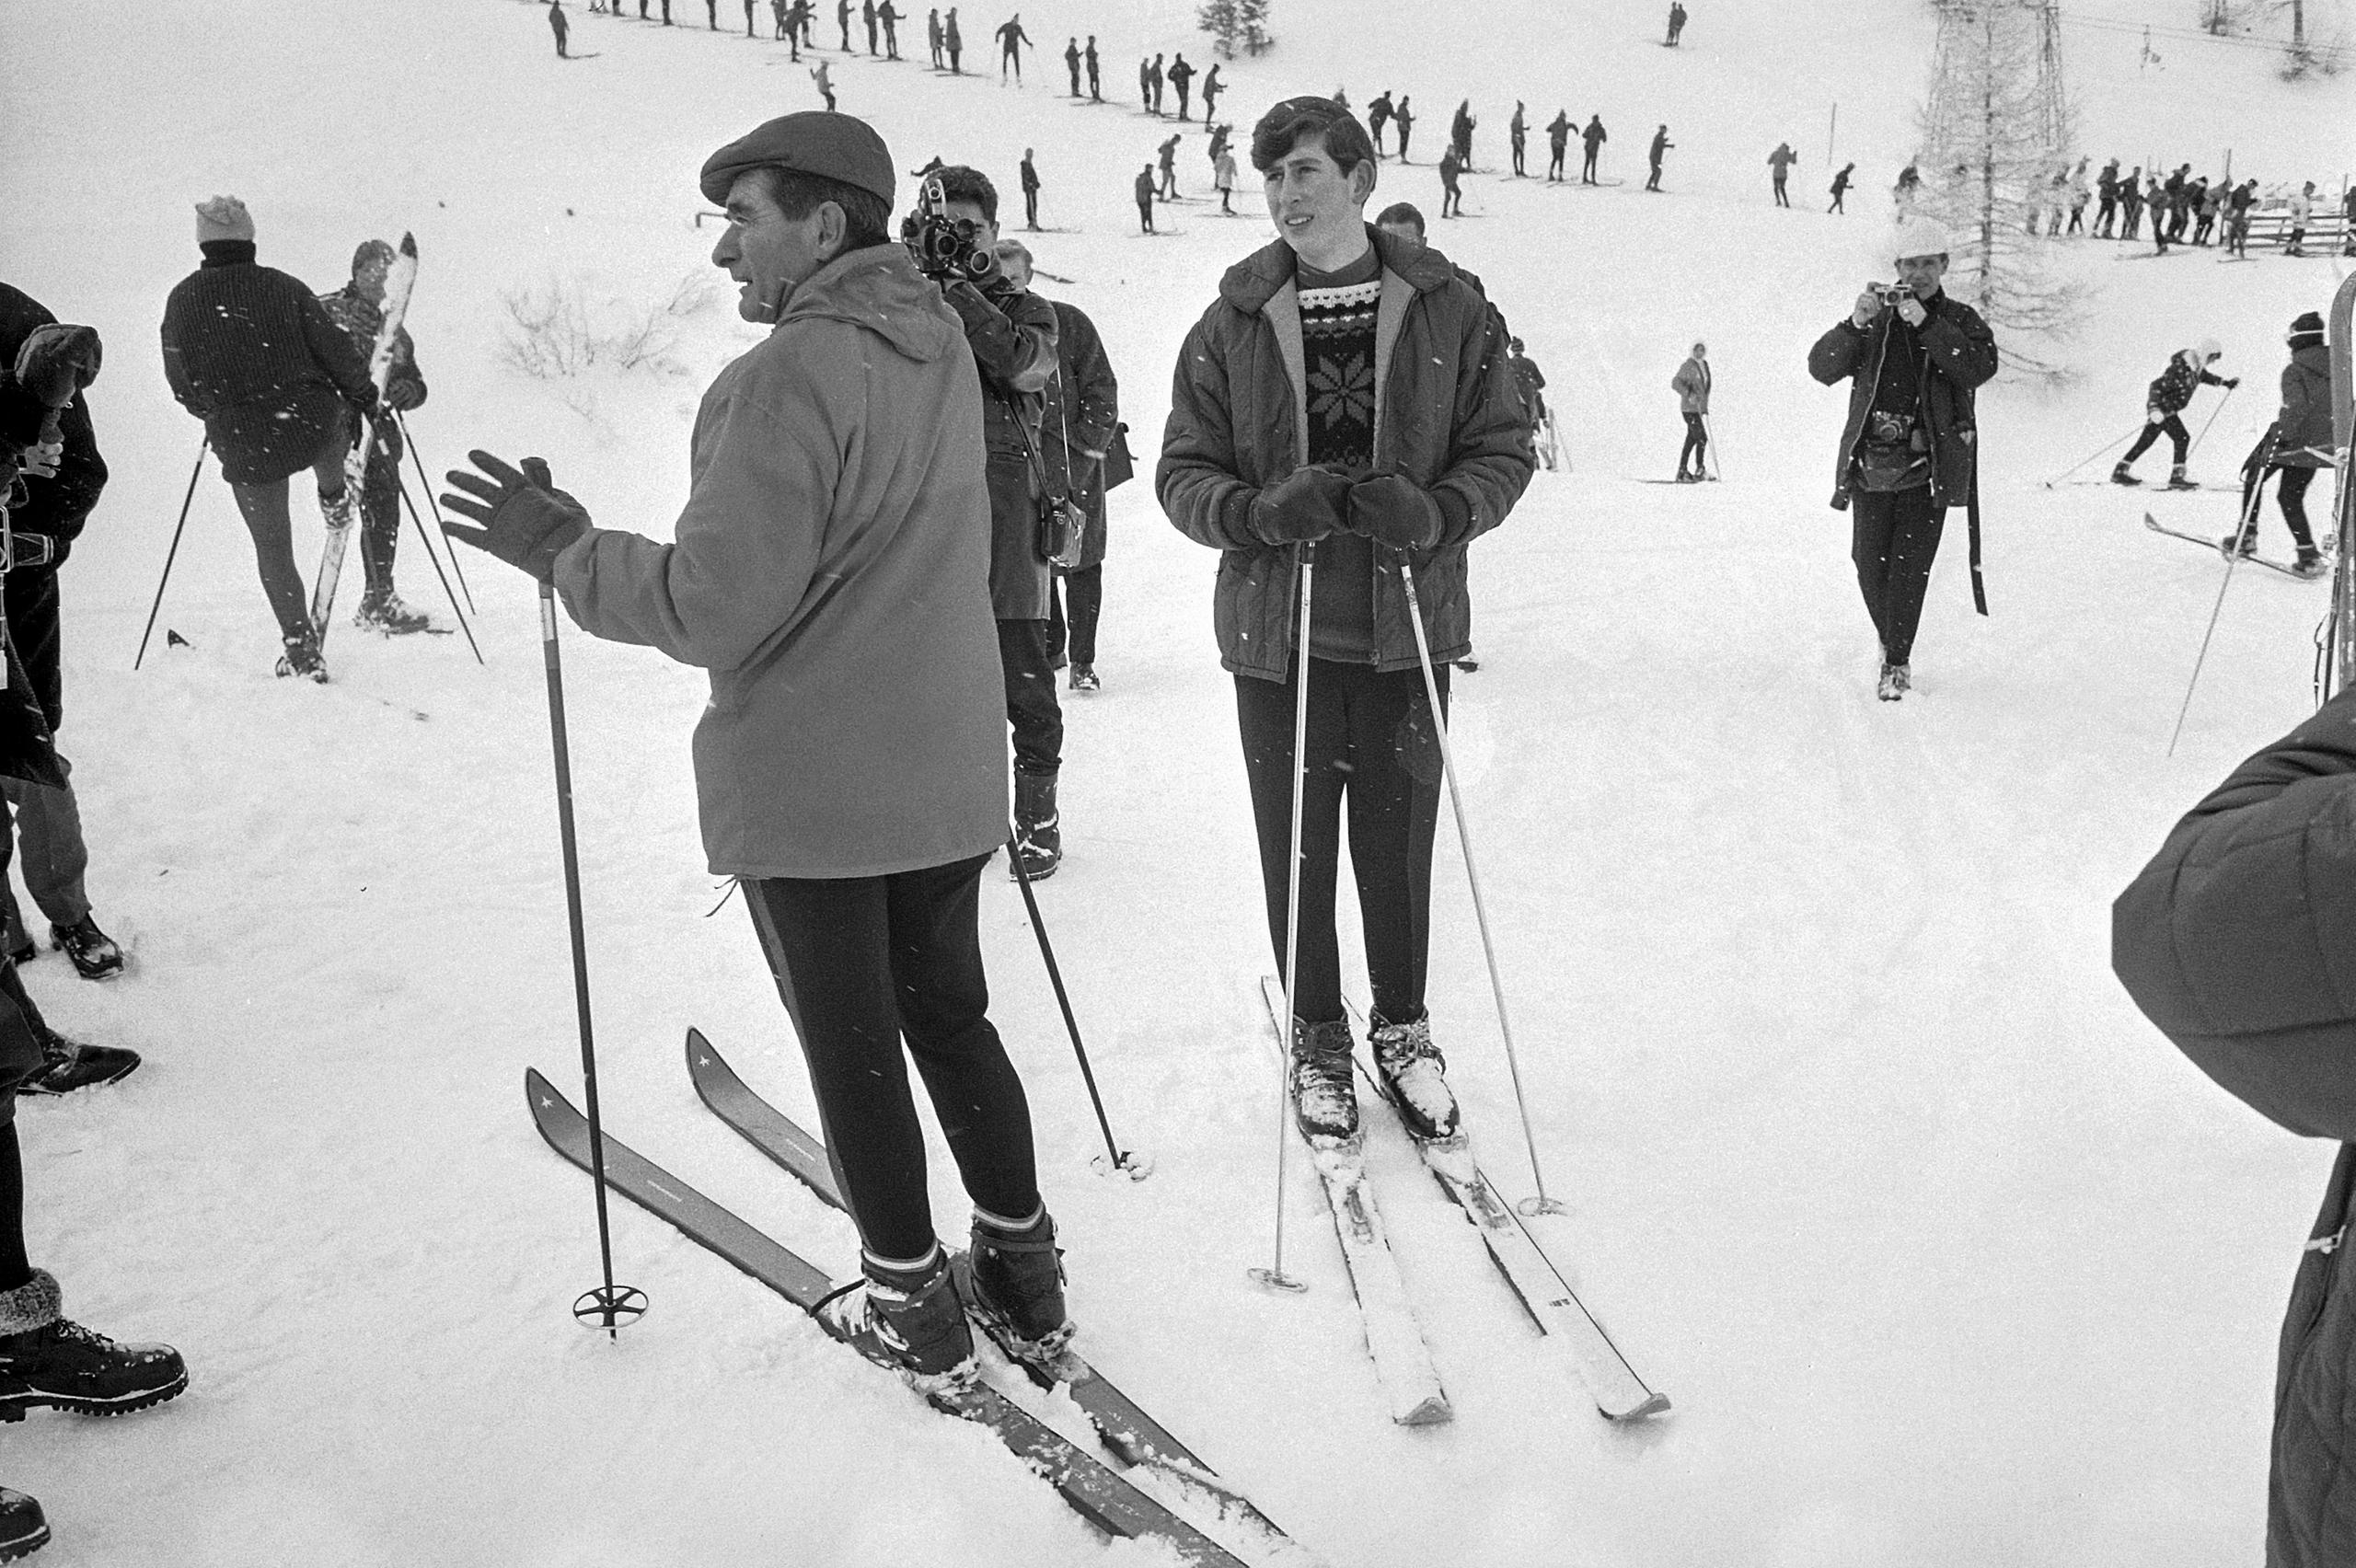 A young Prince Charles on the ski slopes